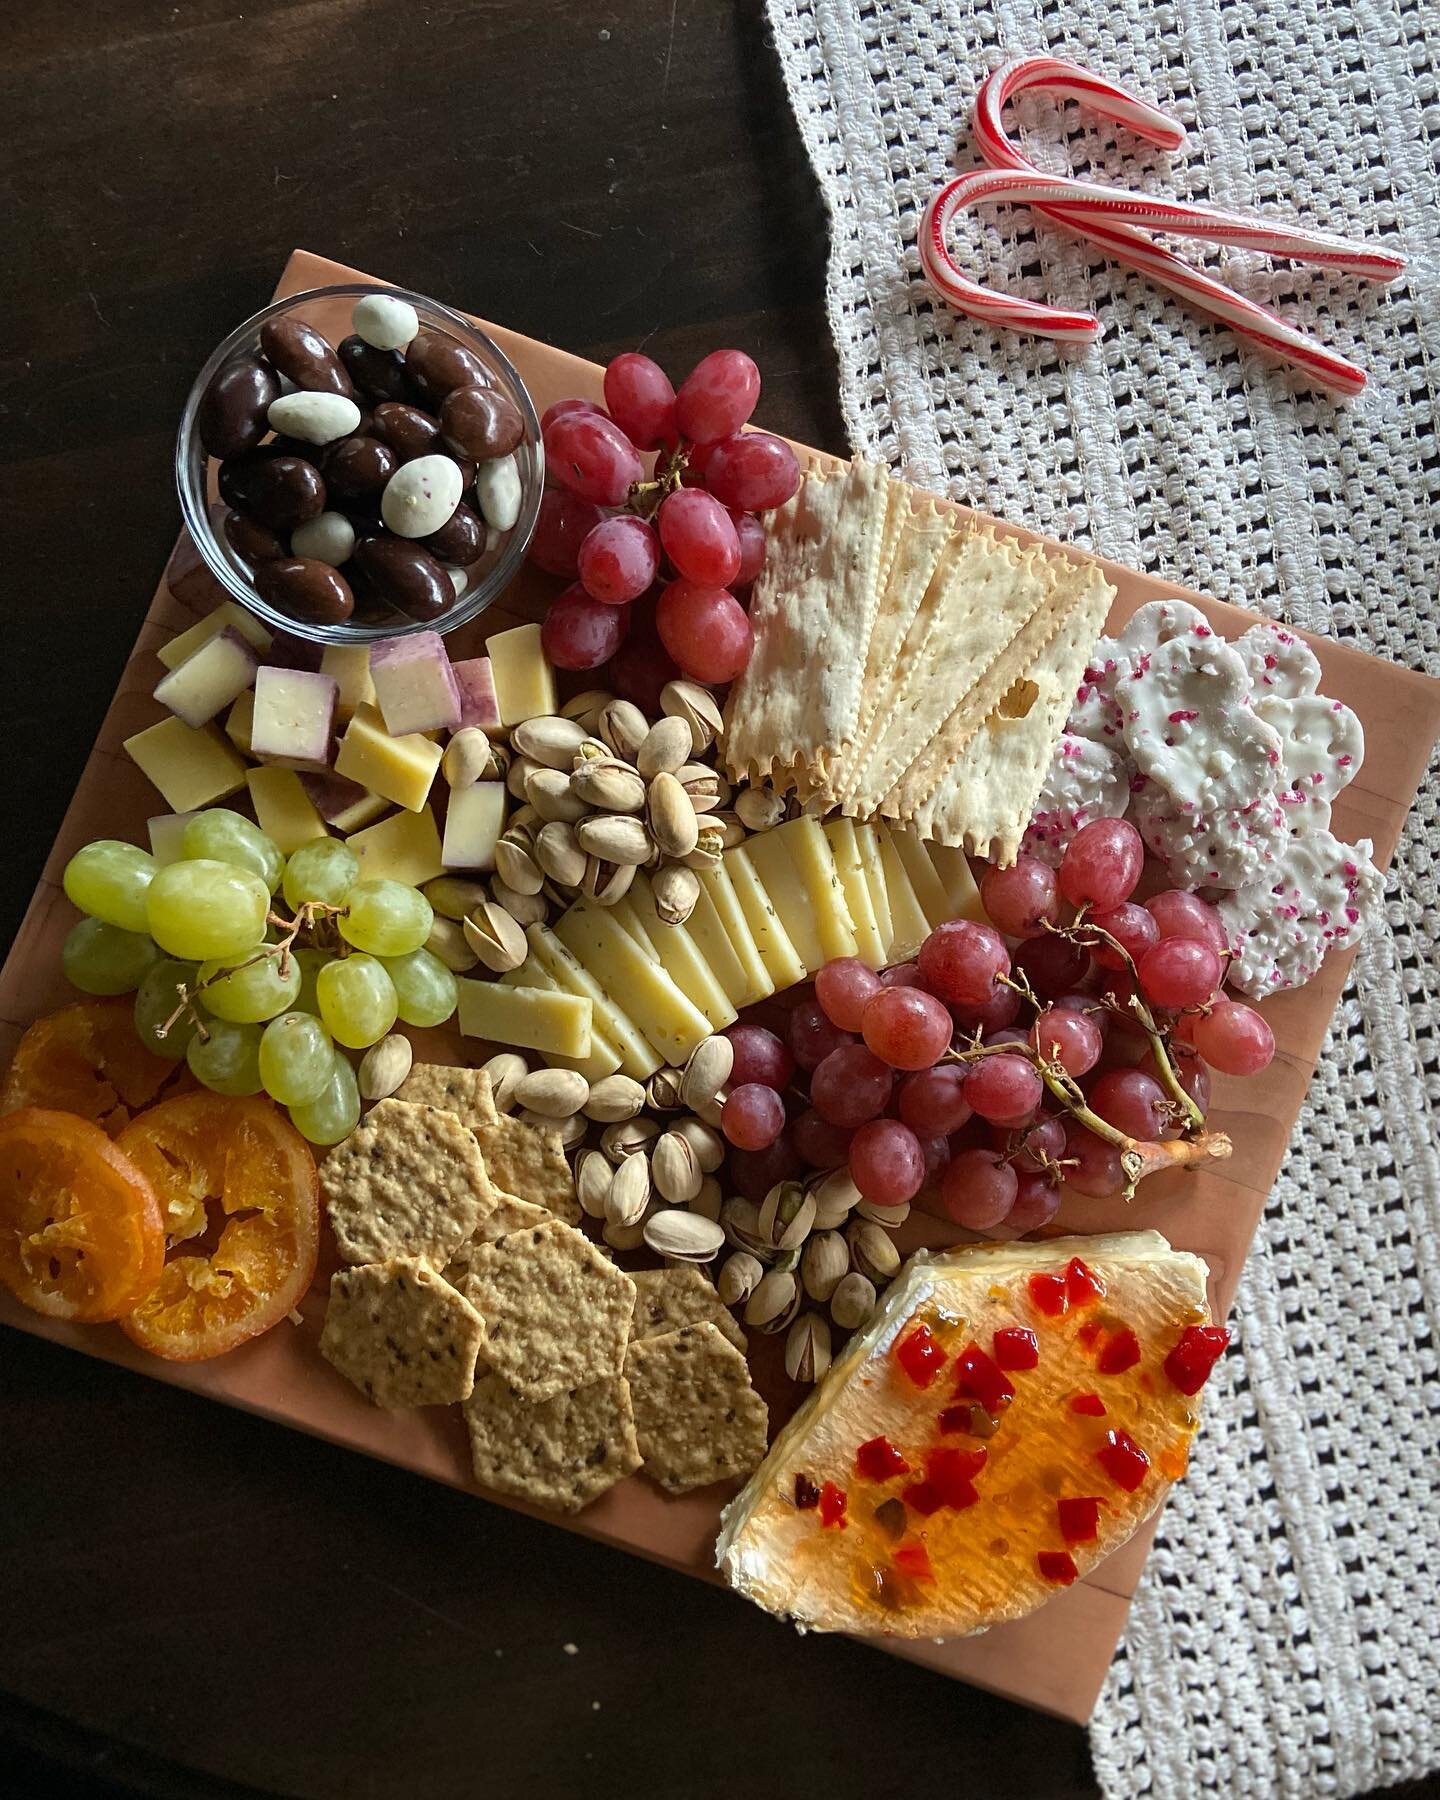 There&rsquo;s still time to order for your boards for pick up or delivery this Holiday season! Choose from:

🎁Holiday Classic Charcuterie Board for appetizers or a tasty host gift! 

🎁Holiday Sweets n Treats Board for the sweetest after dinner touc